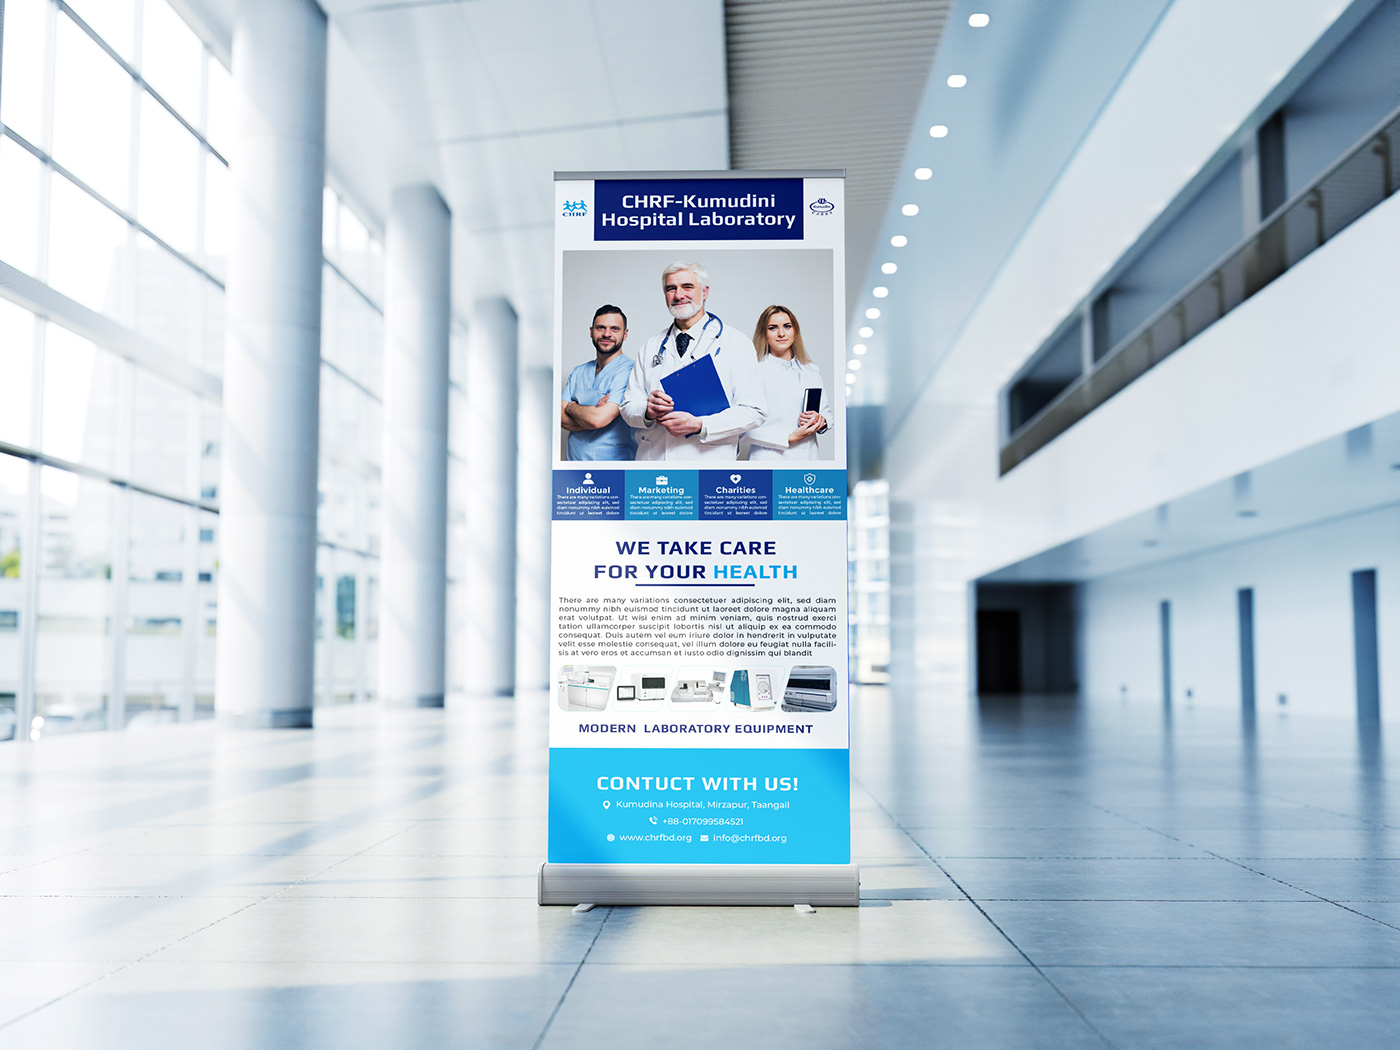 roll up banner banner design Pull up banner banner ads billboard pop up banner Signage signage design retractable banner Roll Up